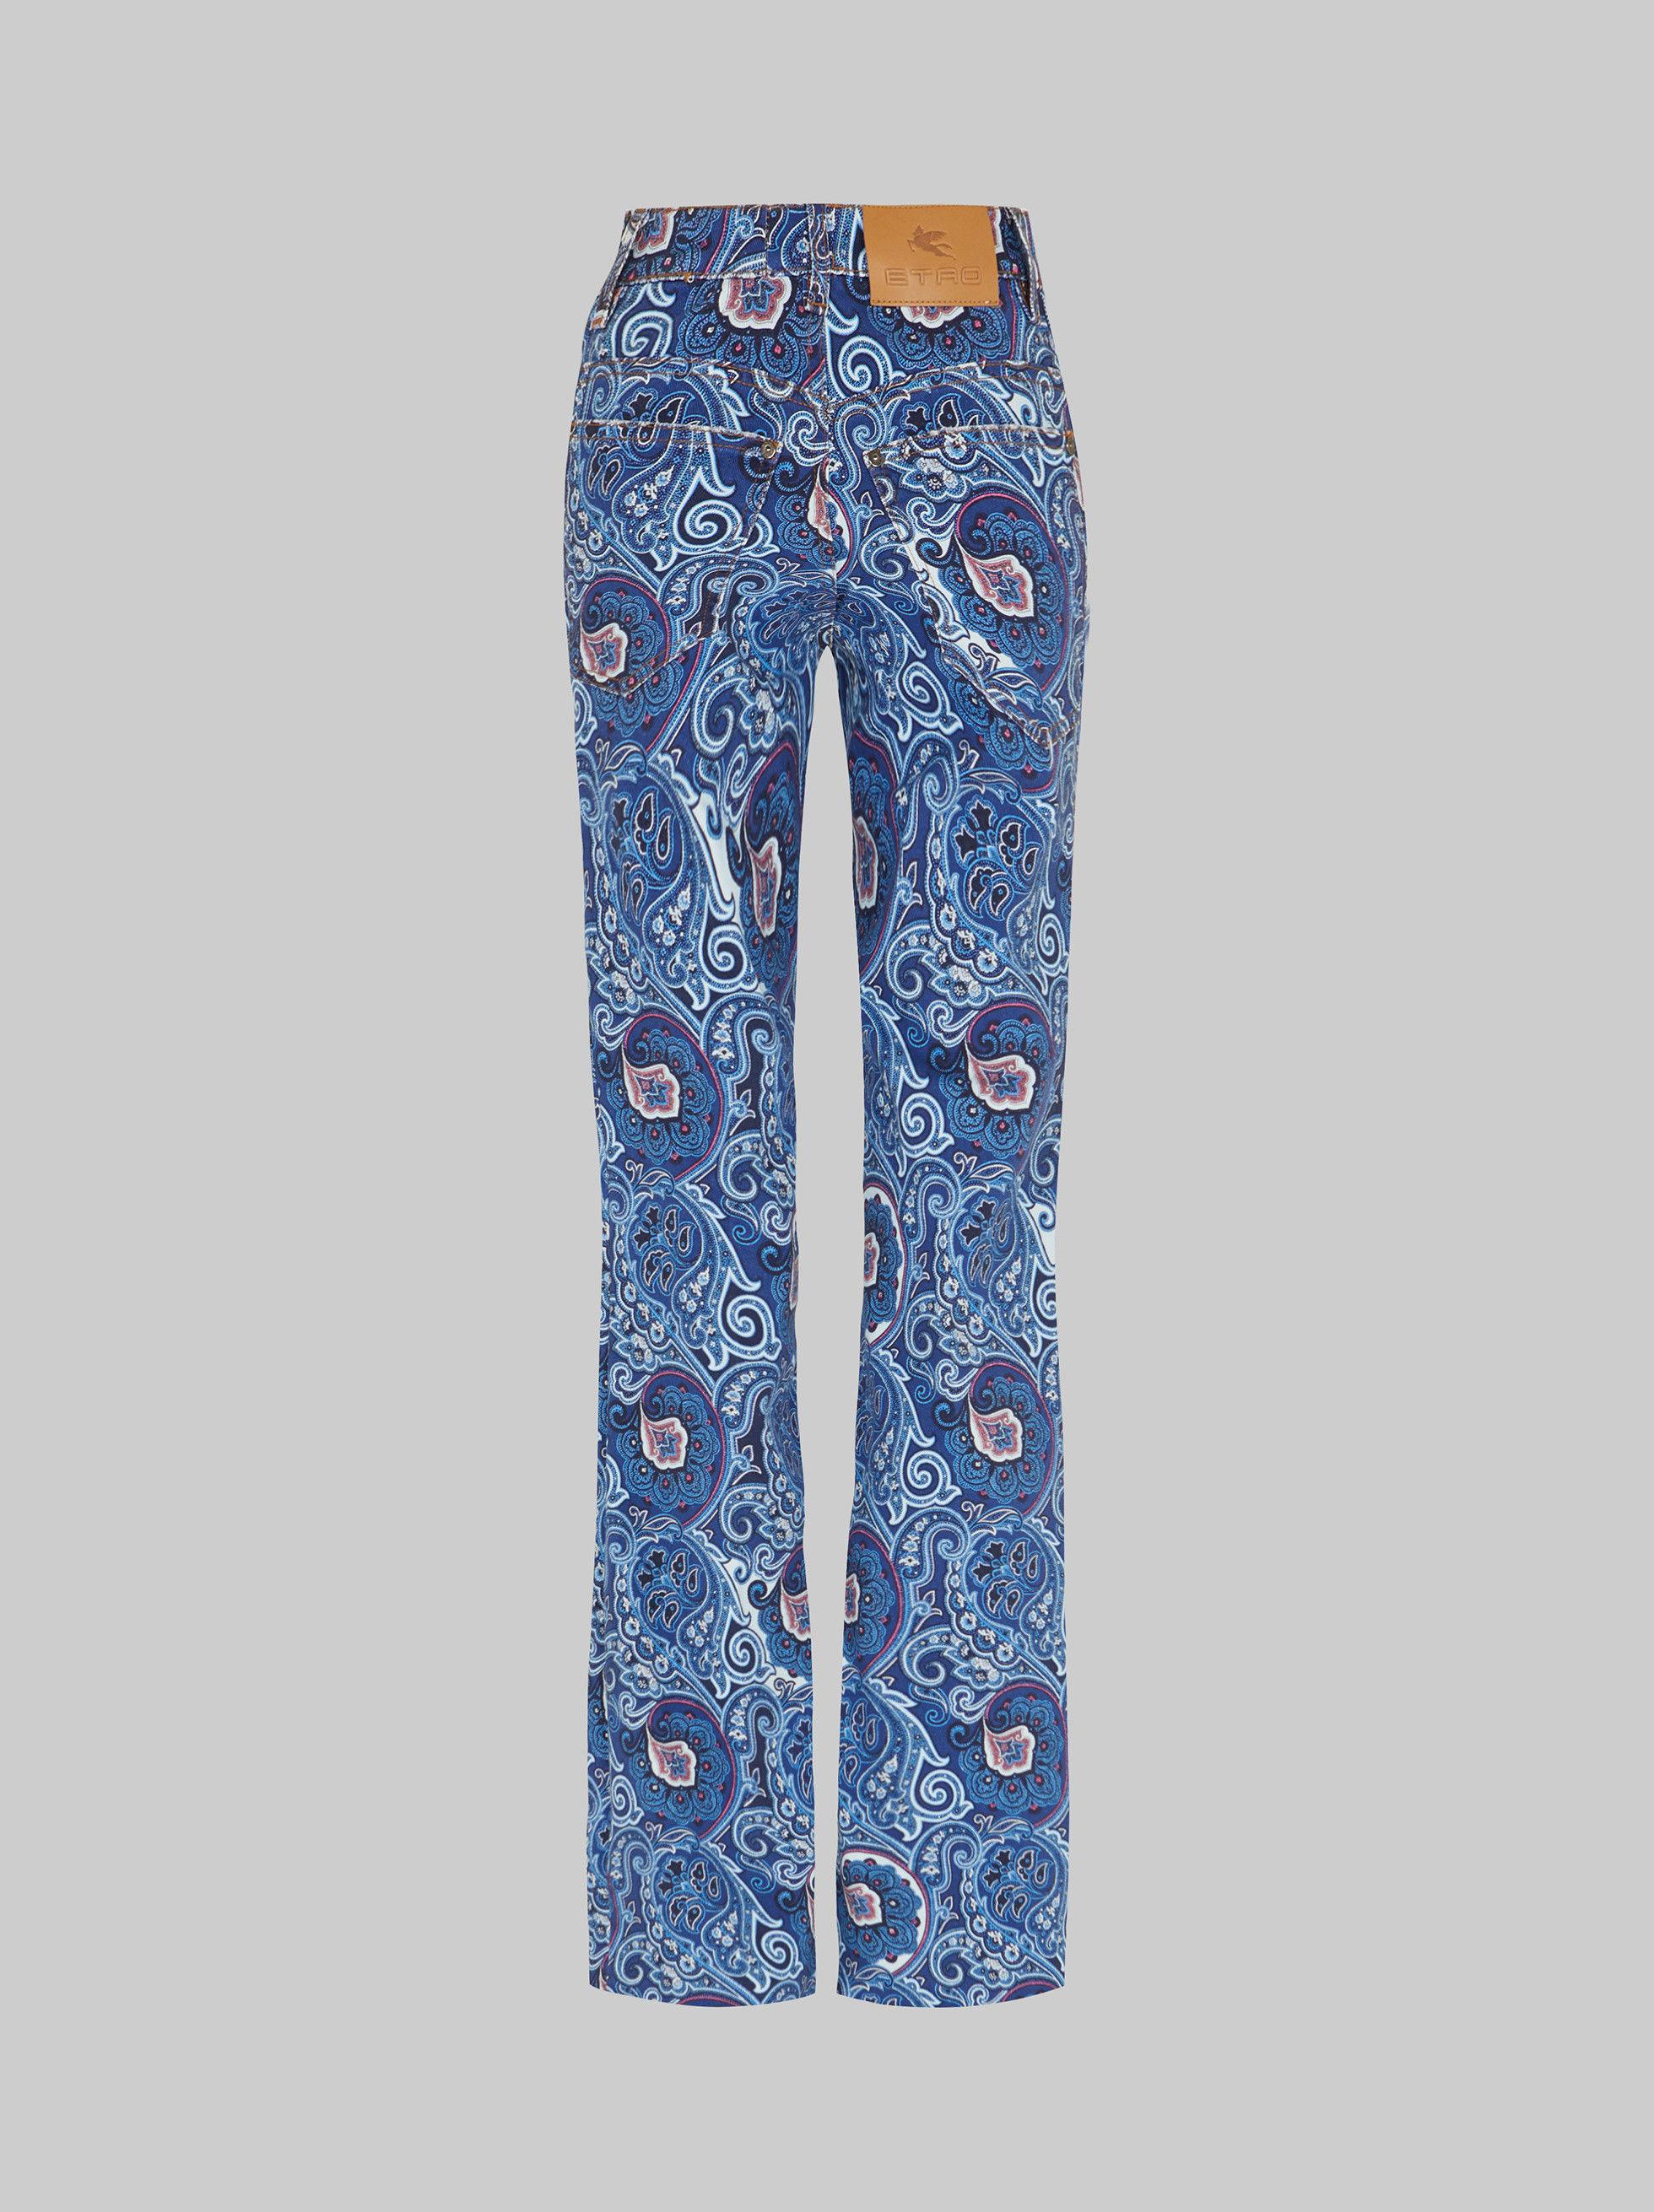 Etro Denim Paisley Print Flared Jeans in Electric Blue (Blue) - Save 52 ...